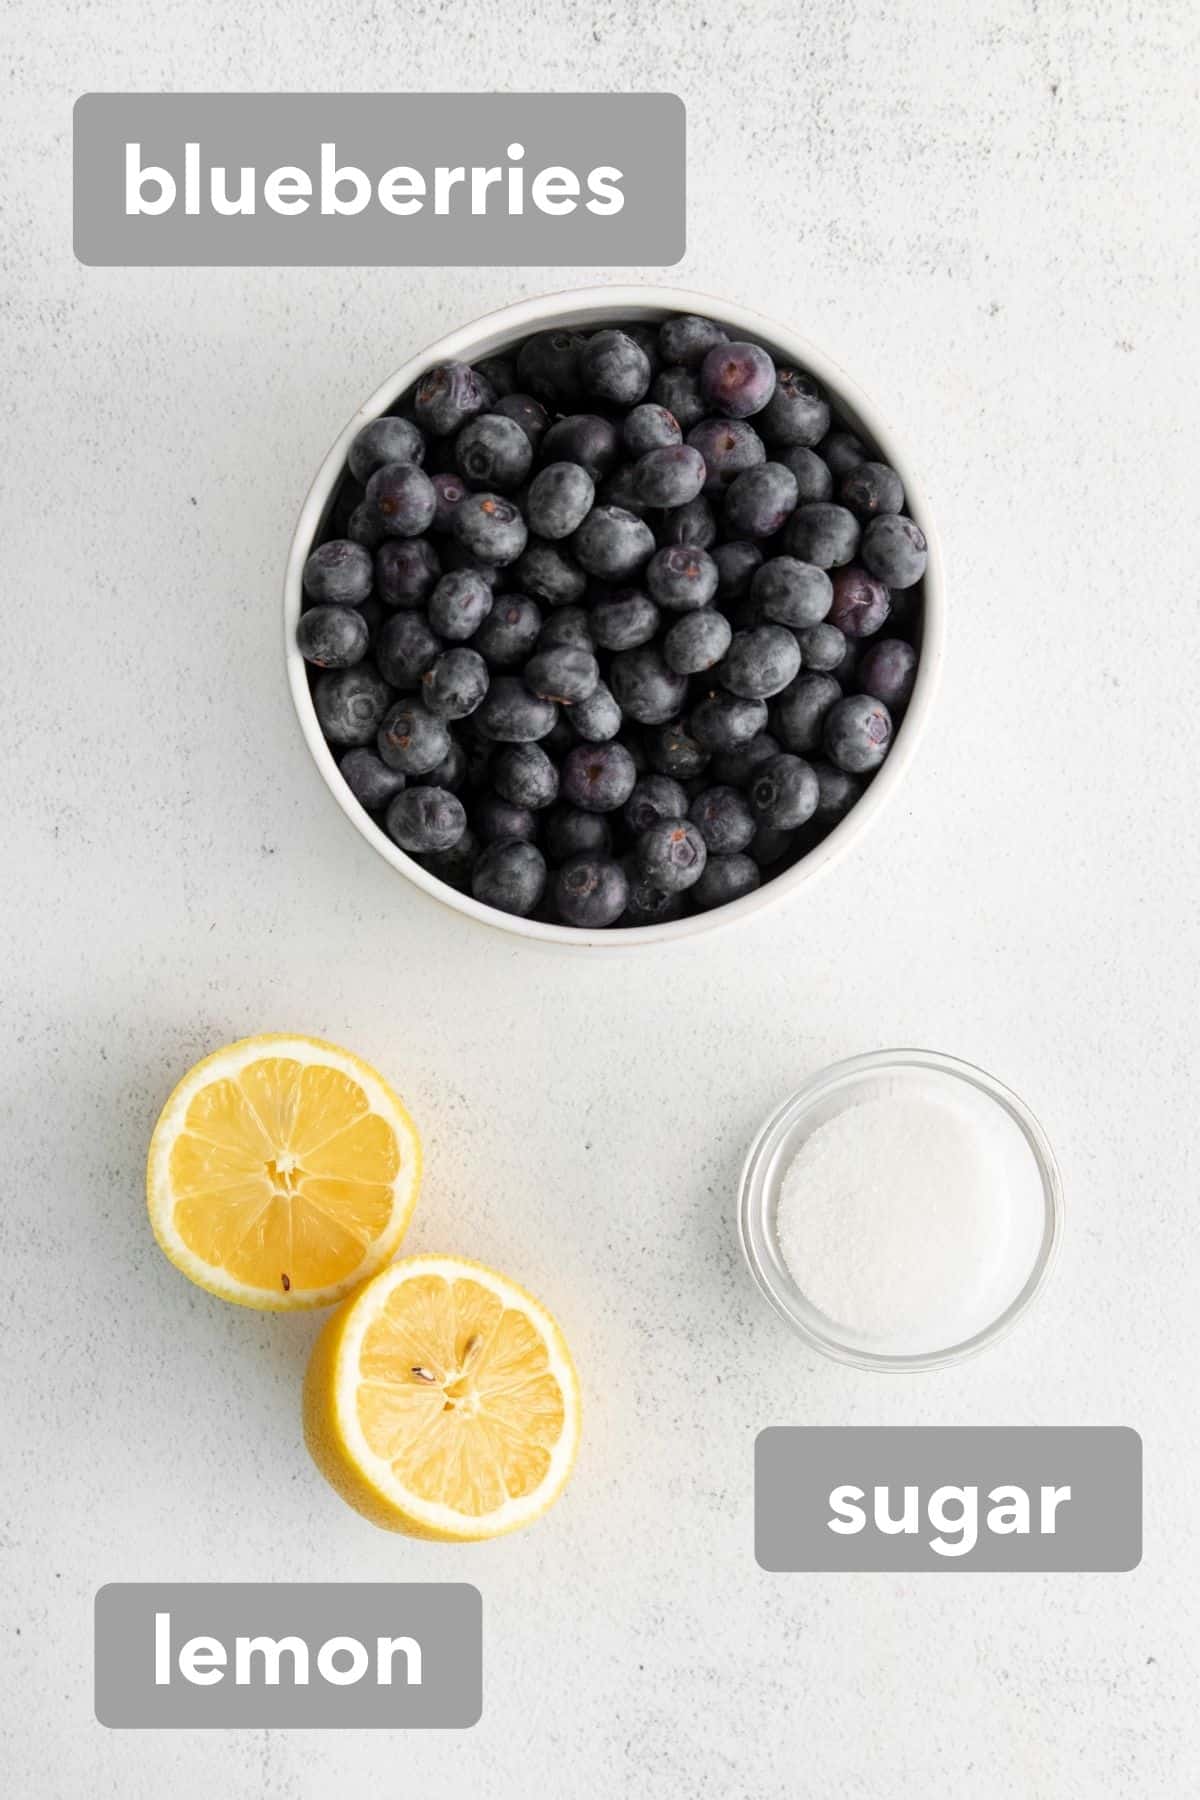 Blueberry compote ingredients, including fresh blueberries, a lemon cut in half, and white sugar